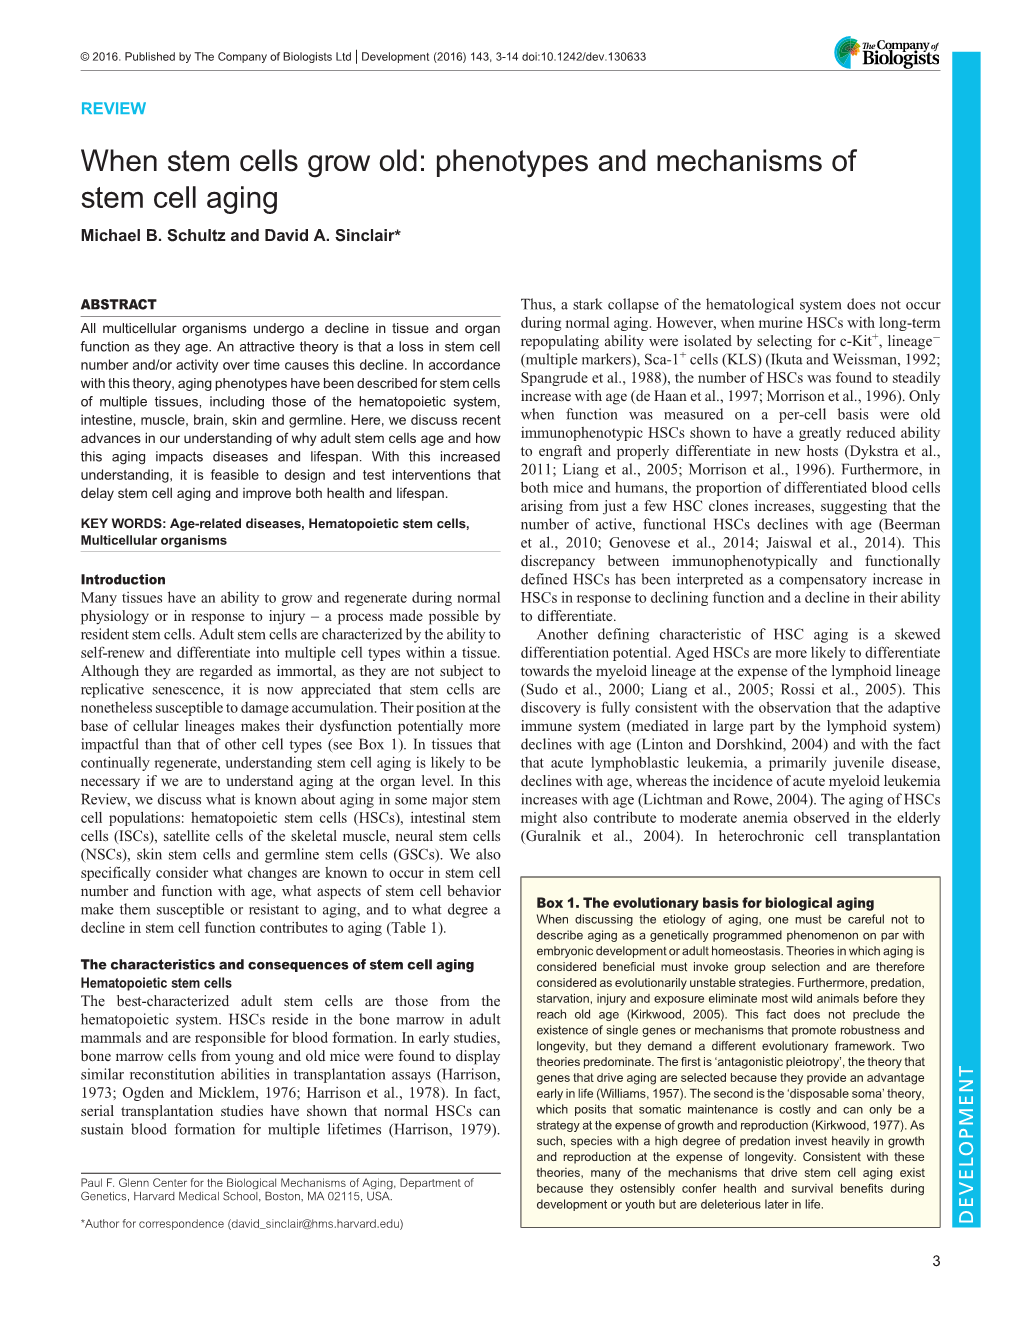 When Stem Cells Grow Old: Phenotypes and Mechanisms of Stem Cell Aging Michael B